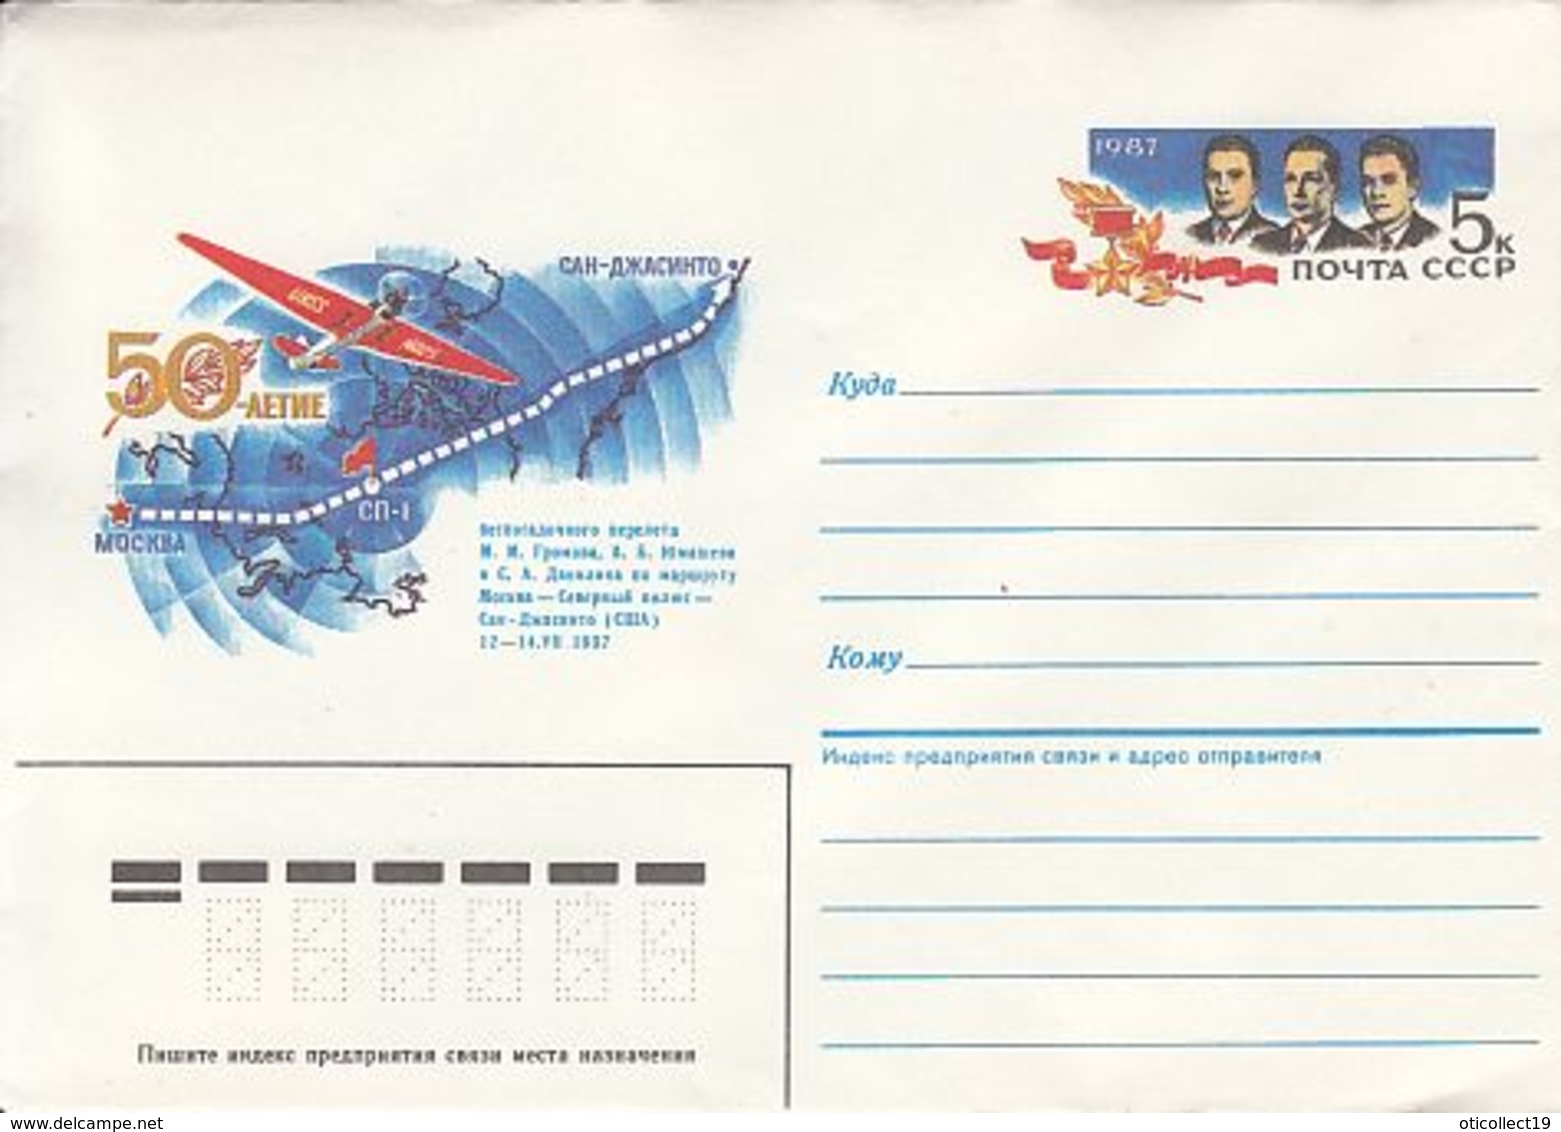 POLAR FLIGHTS, MOSCOW-SAN JACINTO FLIGHT OVER NORTH POLE, COVER STATIONERY, 1987, RUSSIA - Vols Polaires